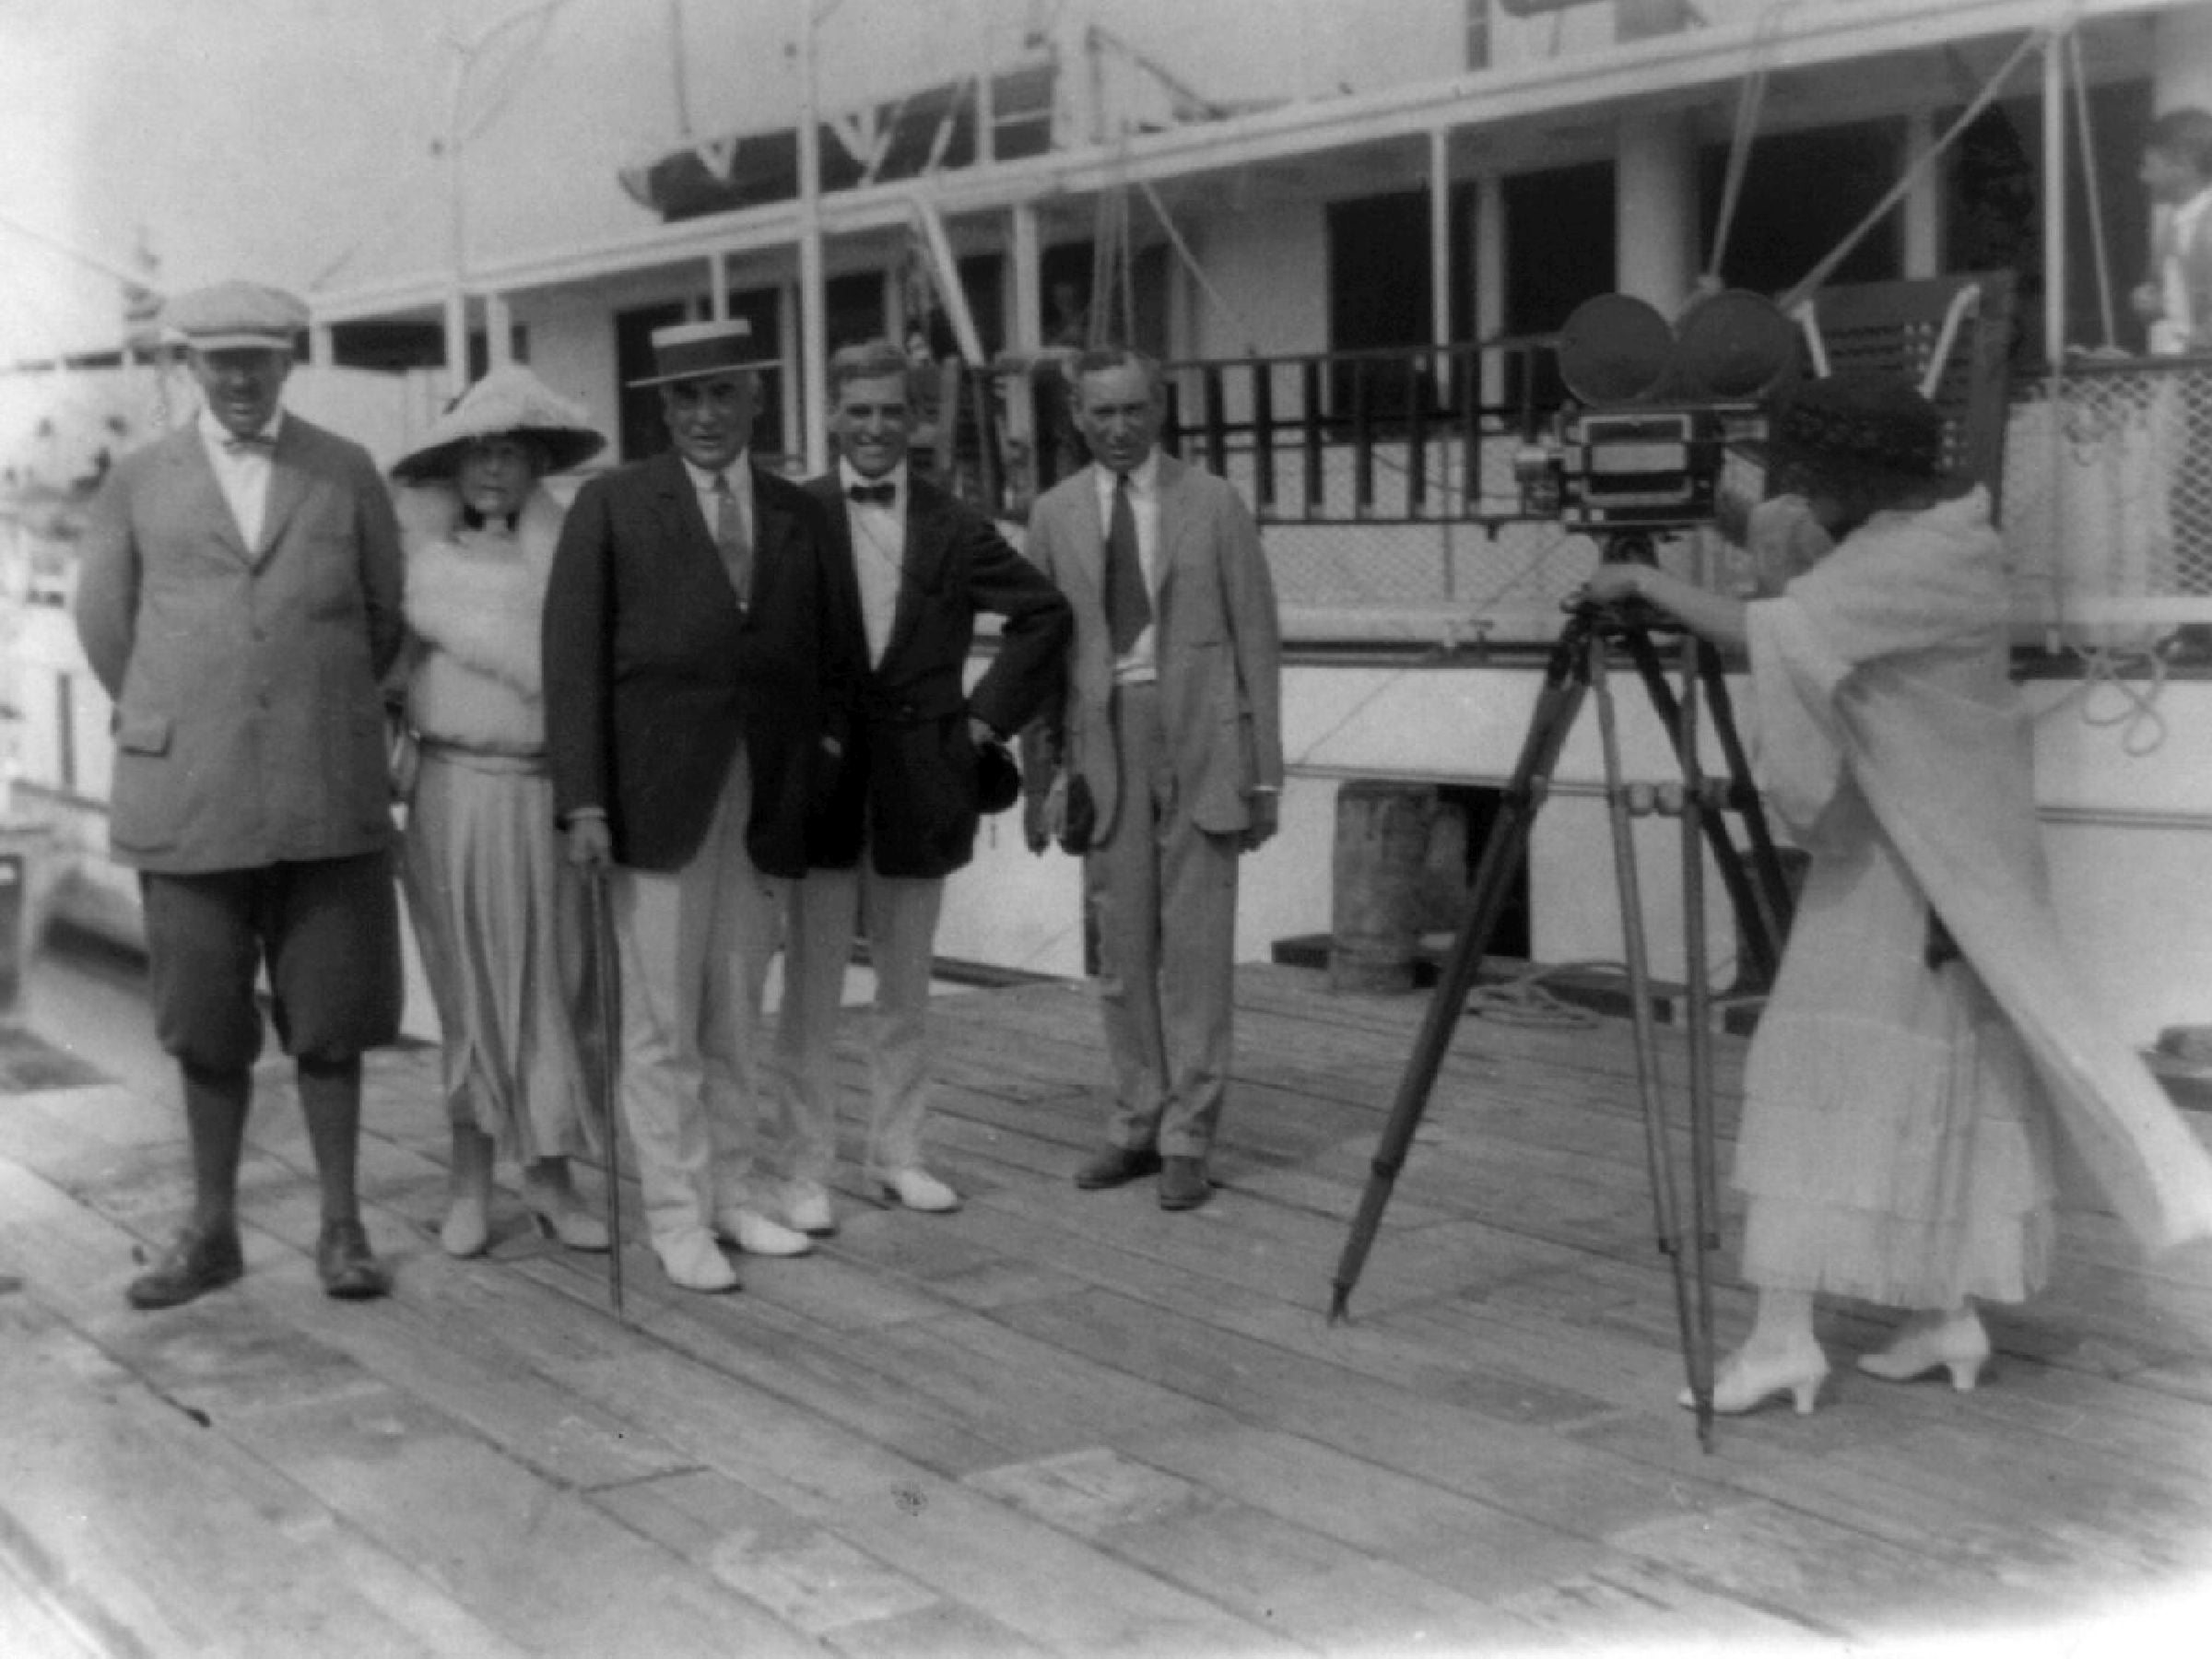 between 1921 and 1923 photograph of Pres. Harding and four other people being fi